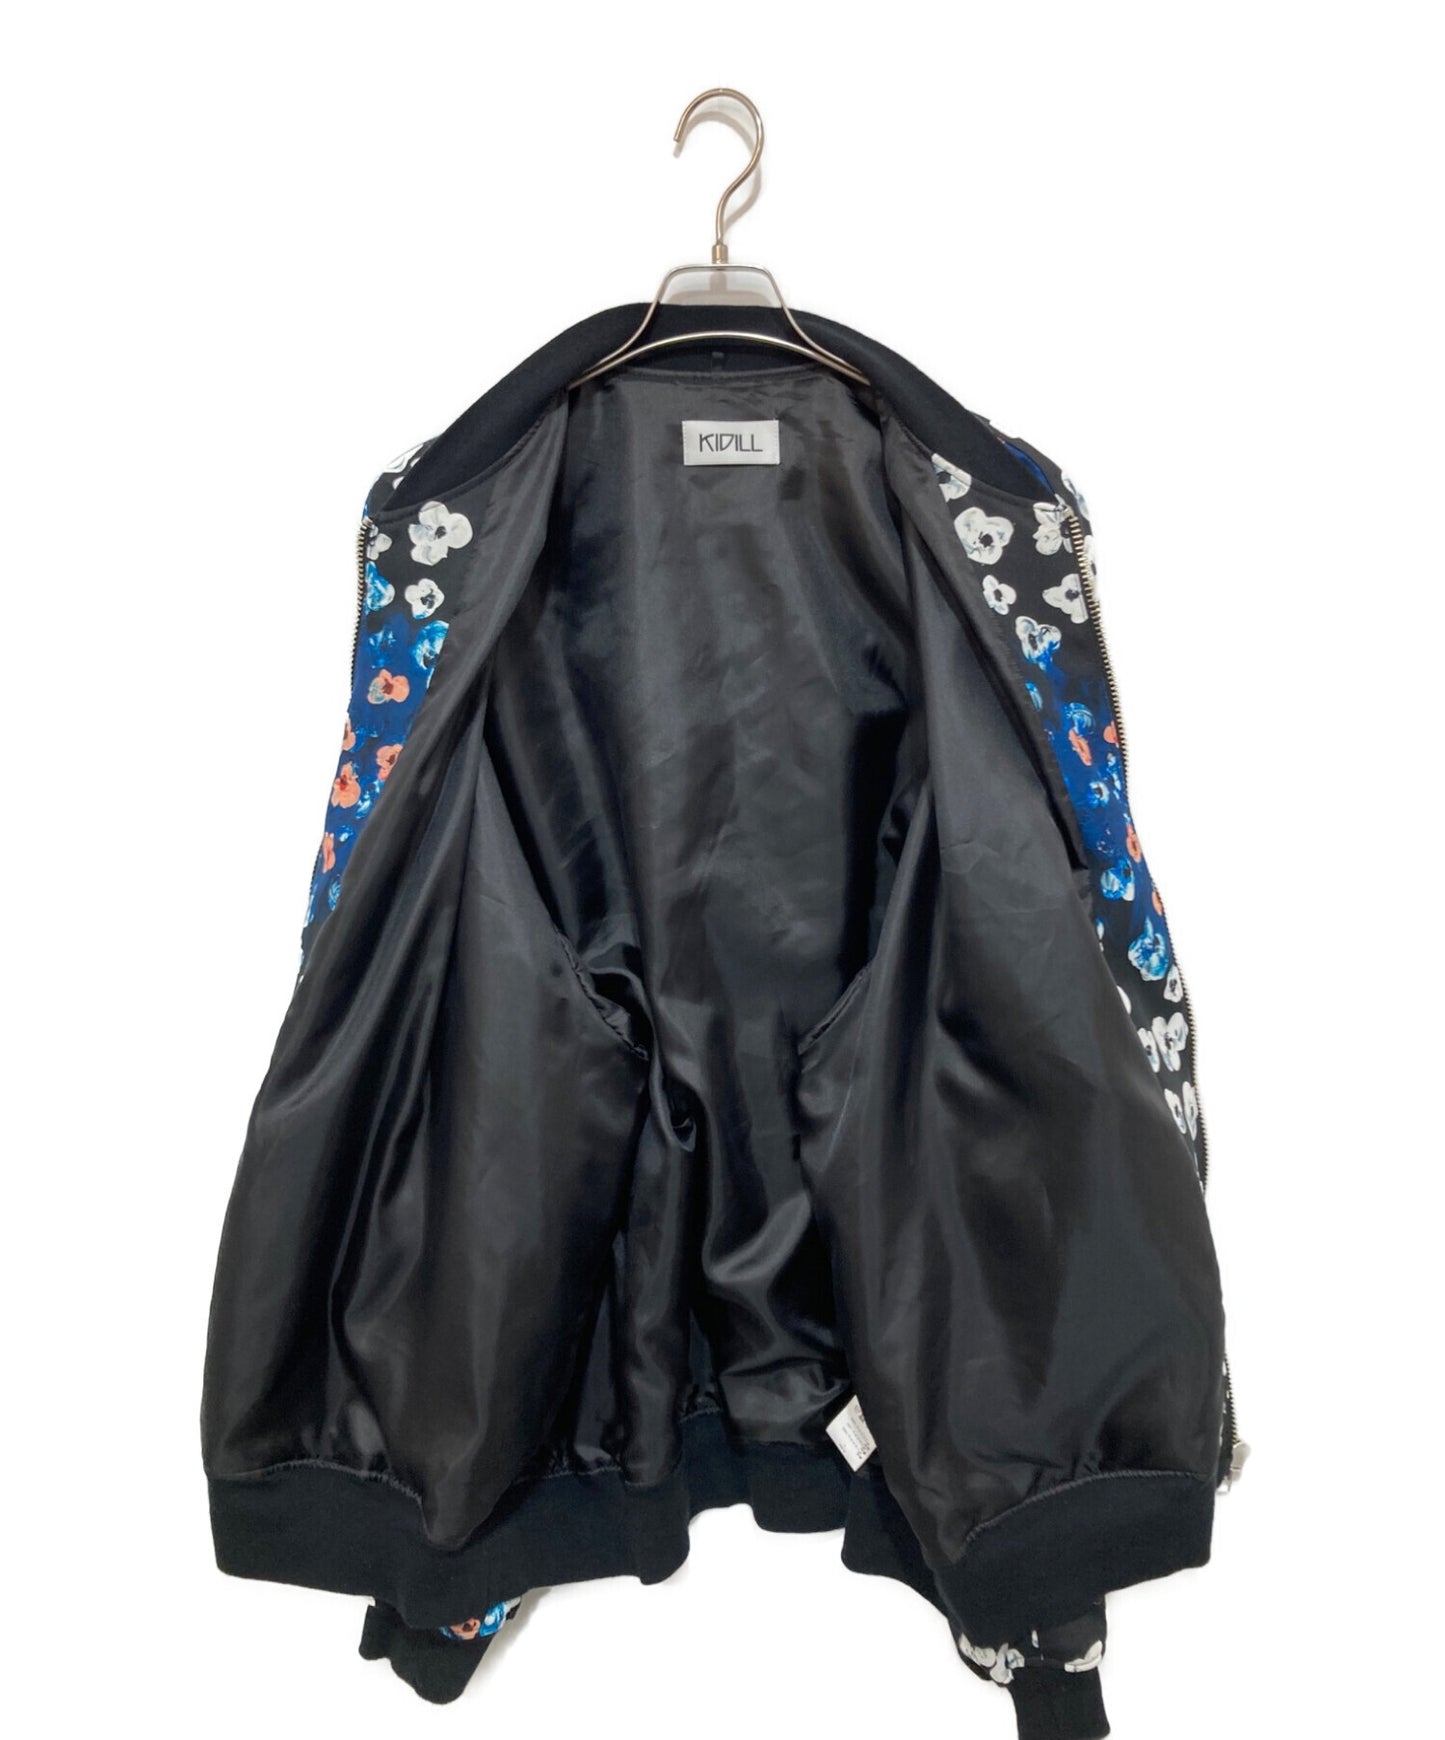 KIDILL MA-1 Blouson/Floral Pattern KL684 | Archive Factory